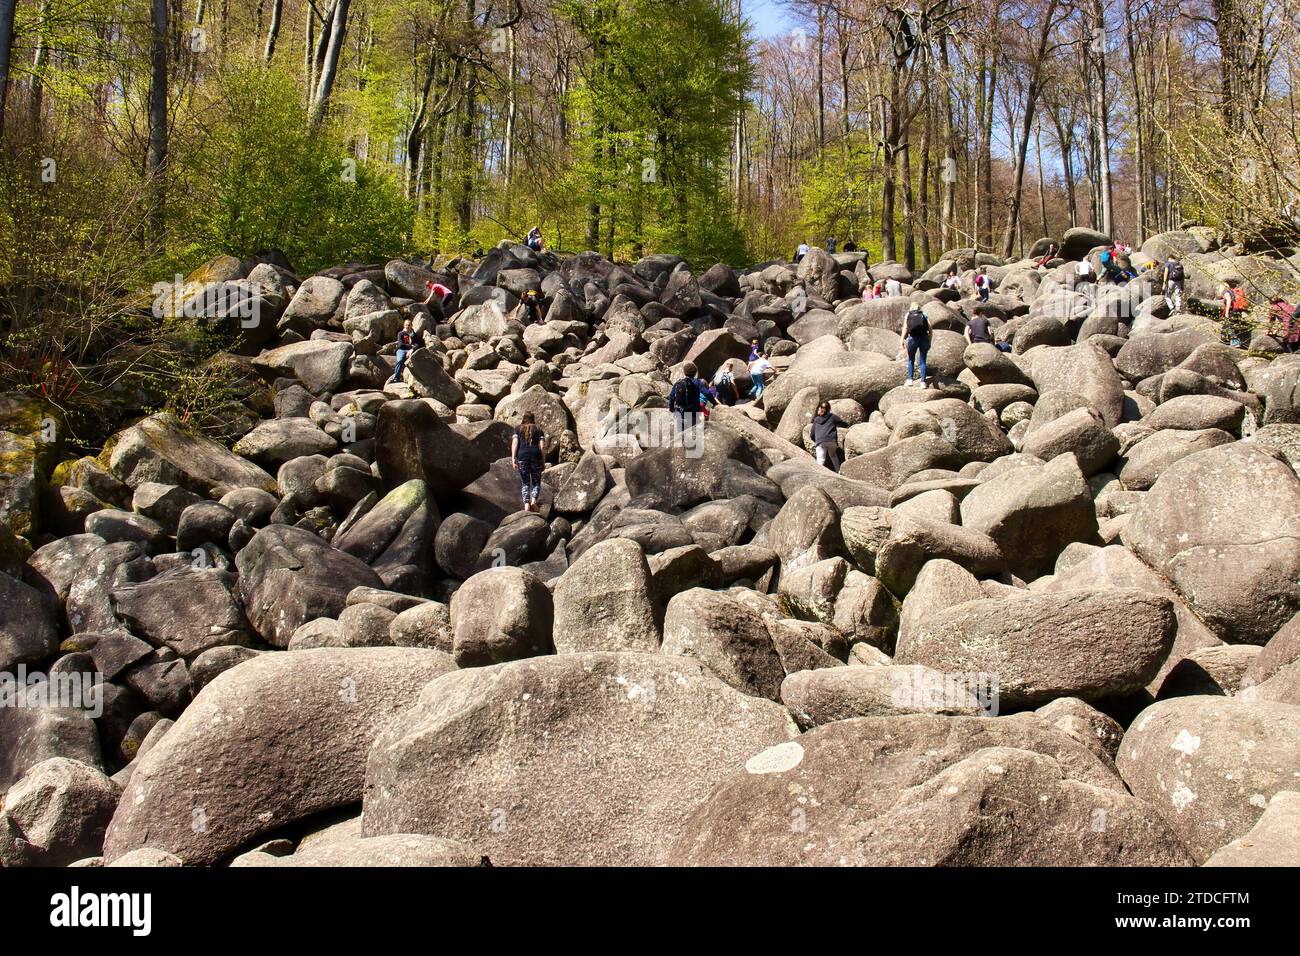 Lautertal, Germany - April 24, 2021: Felsenmeer, a hill covered in rocks, with people climbing on a warm spring day in Germany. Stock Photo